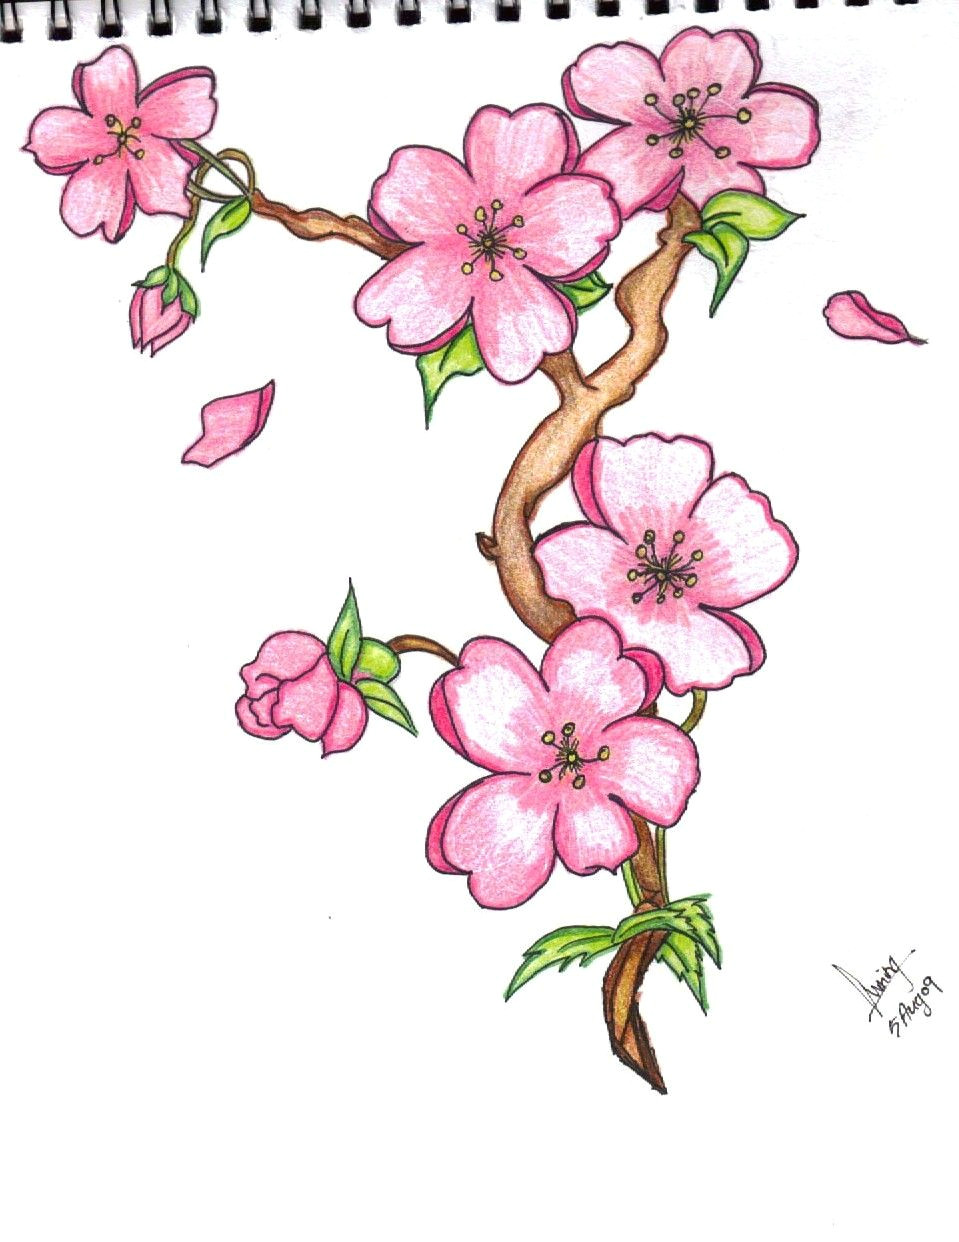 Drawings Of Jasmine Flower Pin by Marvin todd On Drawing Flowers In 2019 Pinterest Drawings